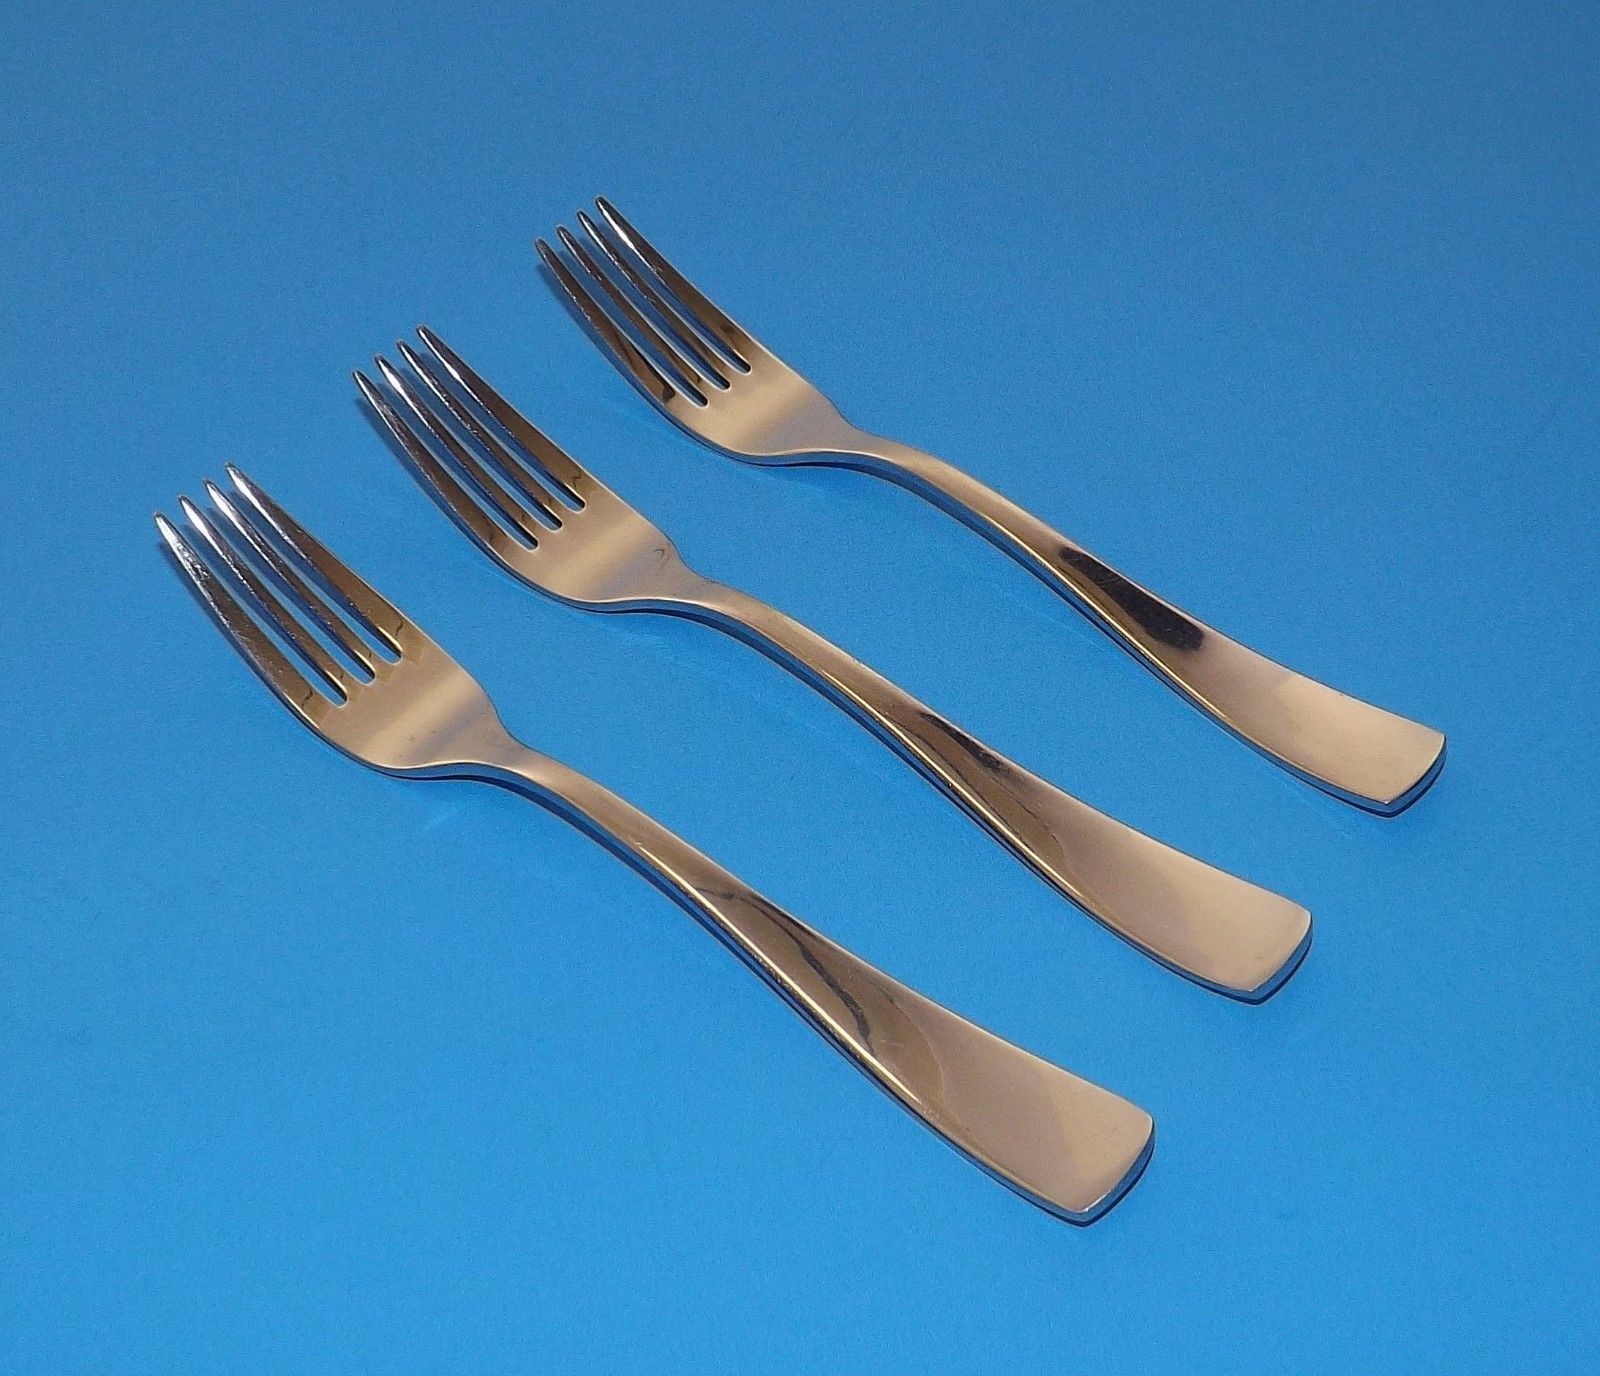 Oster Glossy Set of 3 Salad Forks 7" Stainless Unknown Pattern Lansford?? - $8.68